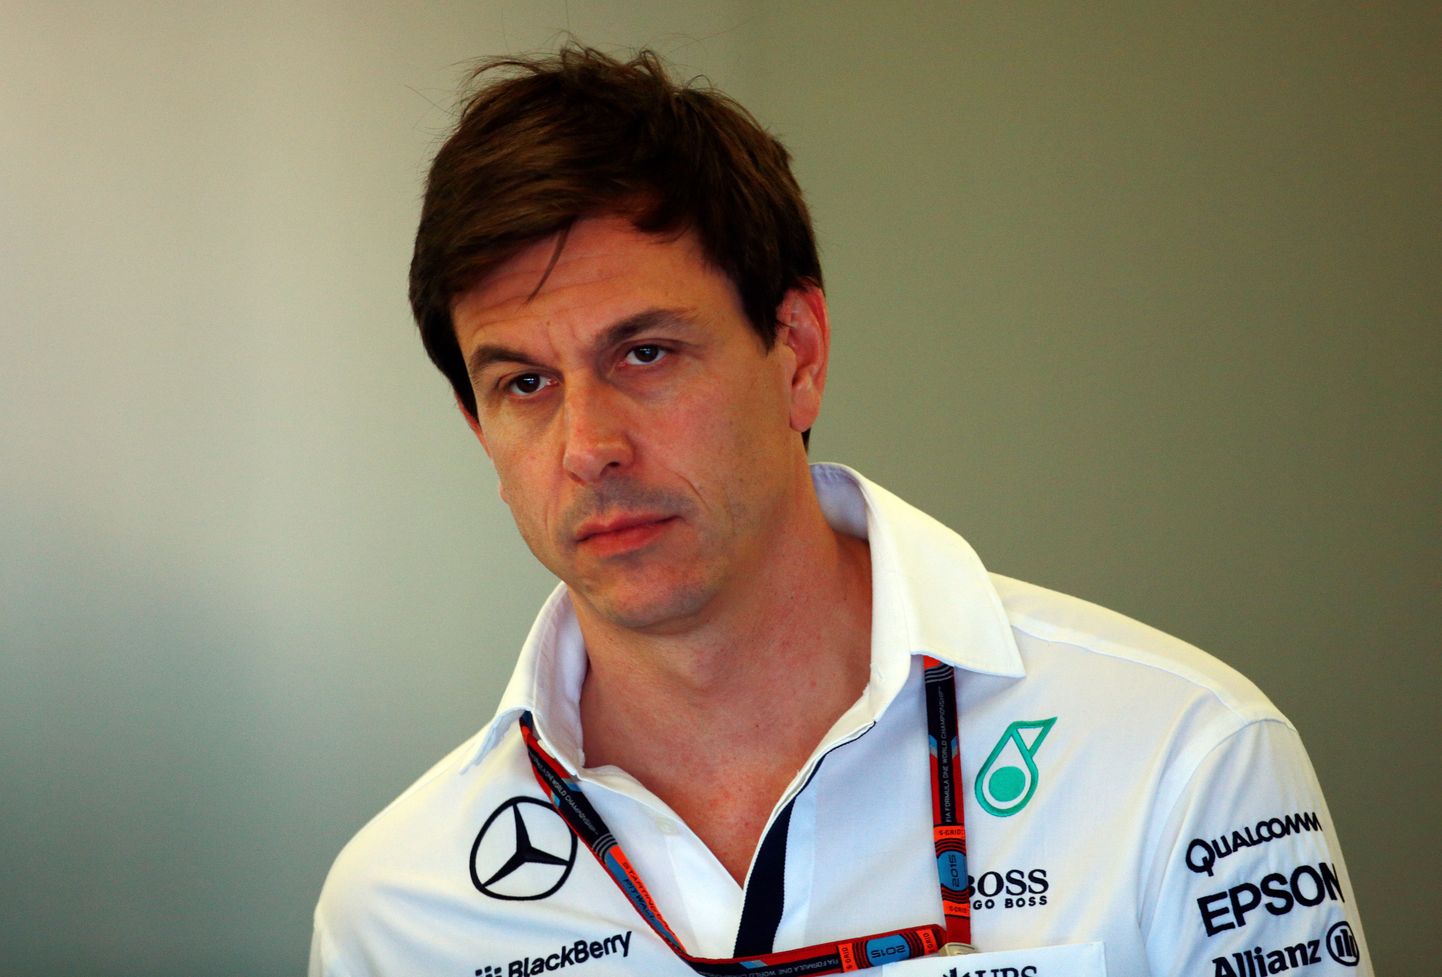 Mercedes Toto Wolff during practice day for the 2015 British Grand Prix at Silverstone Circuit, Towcester.